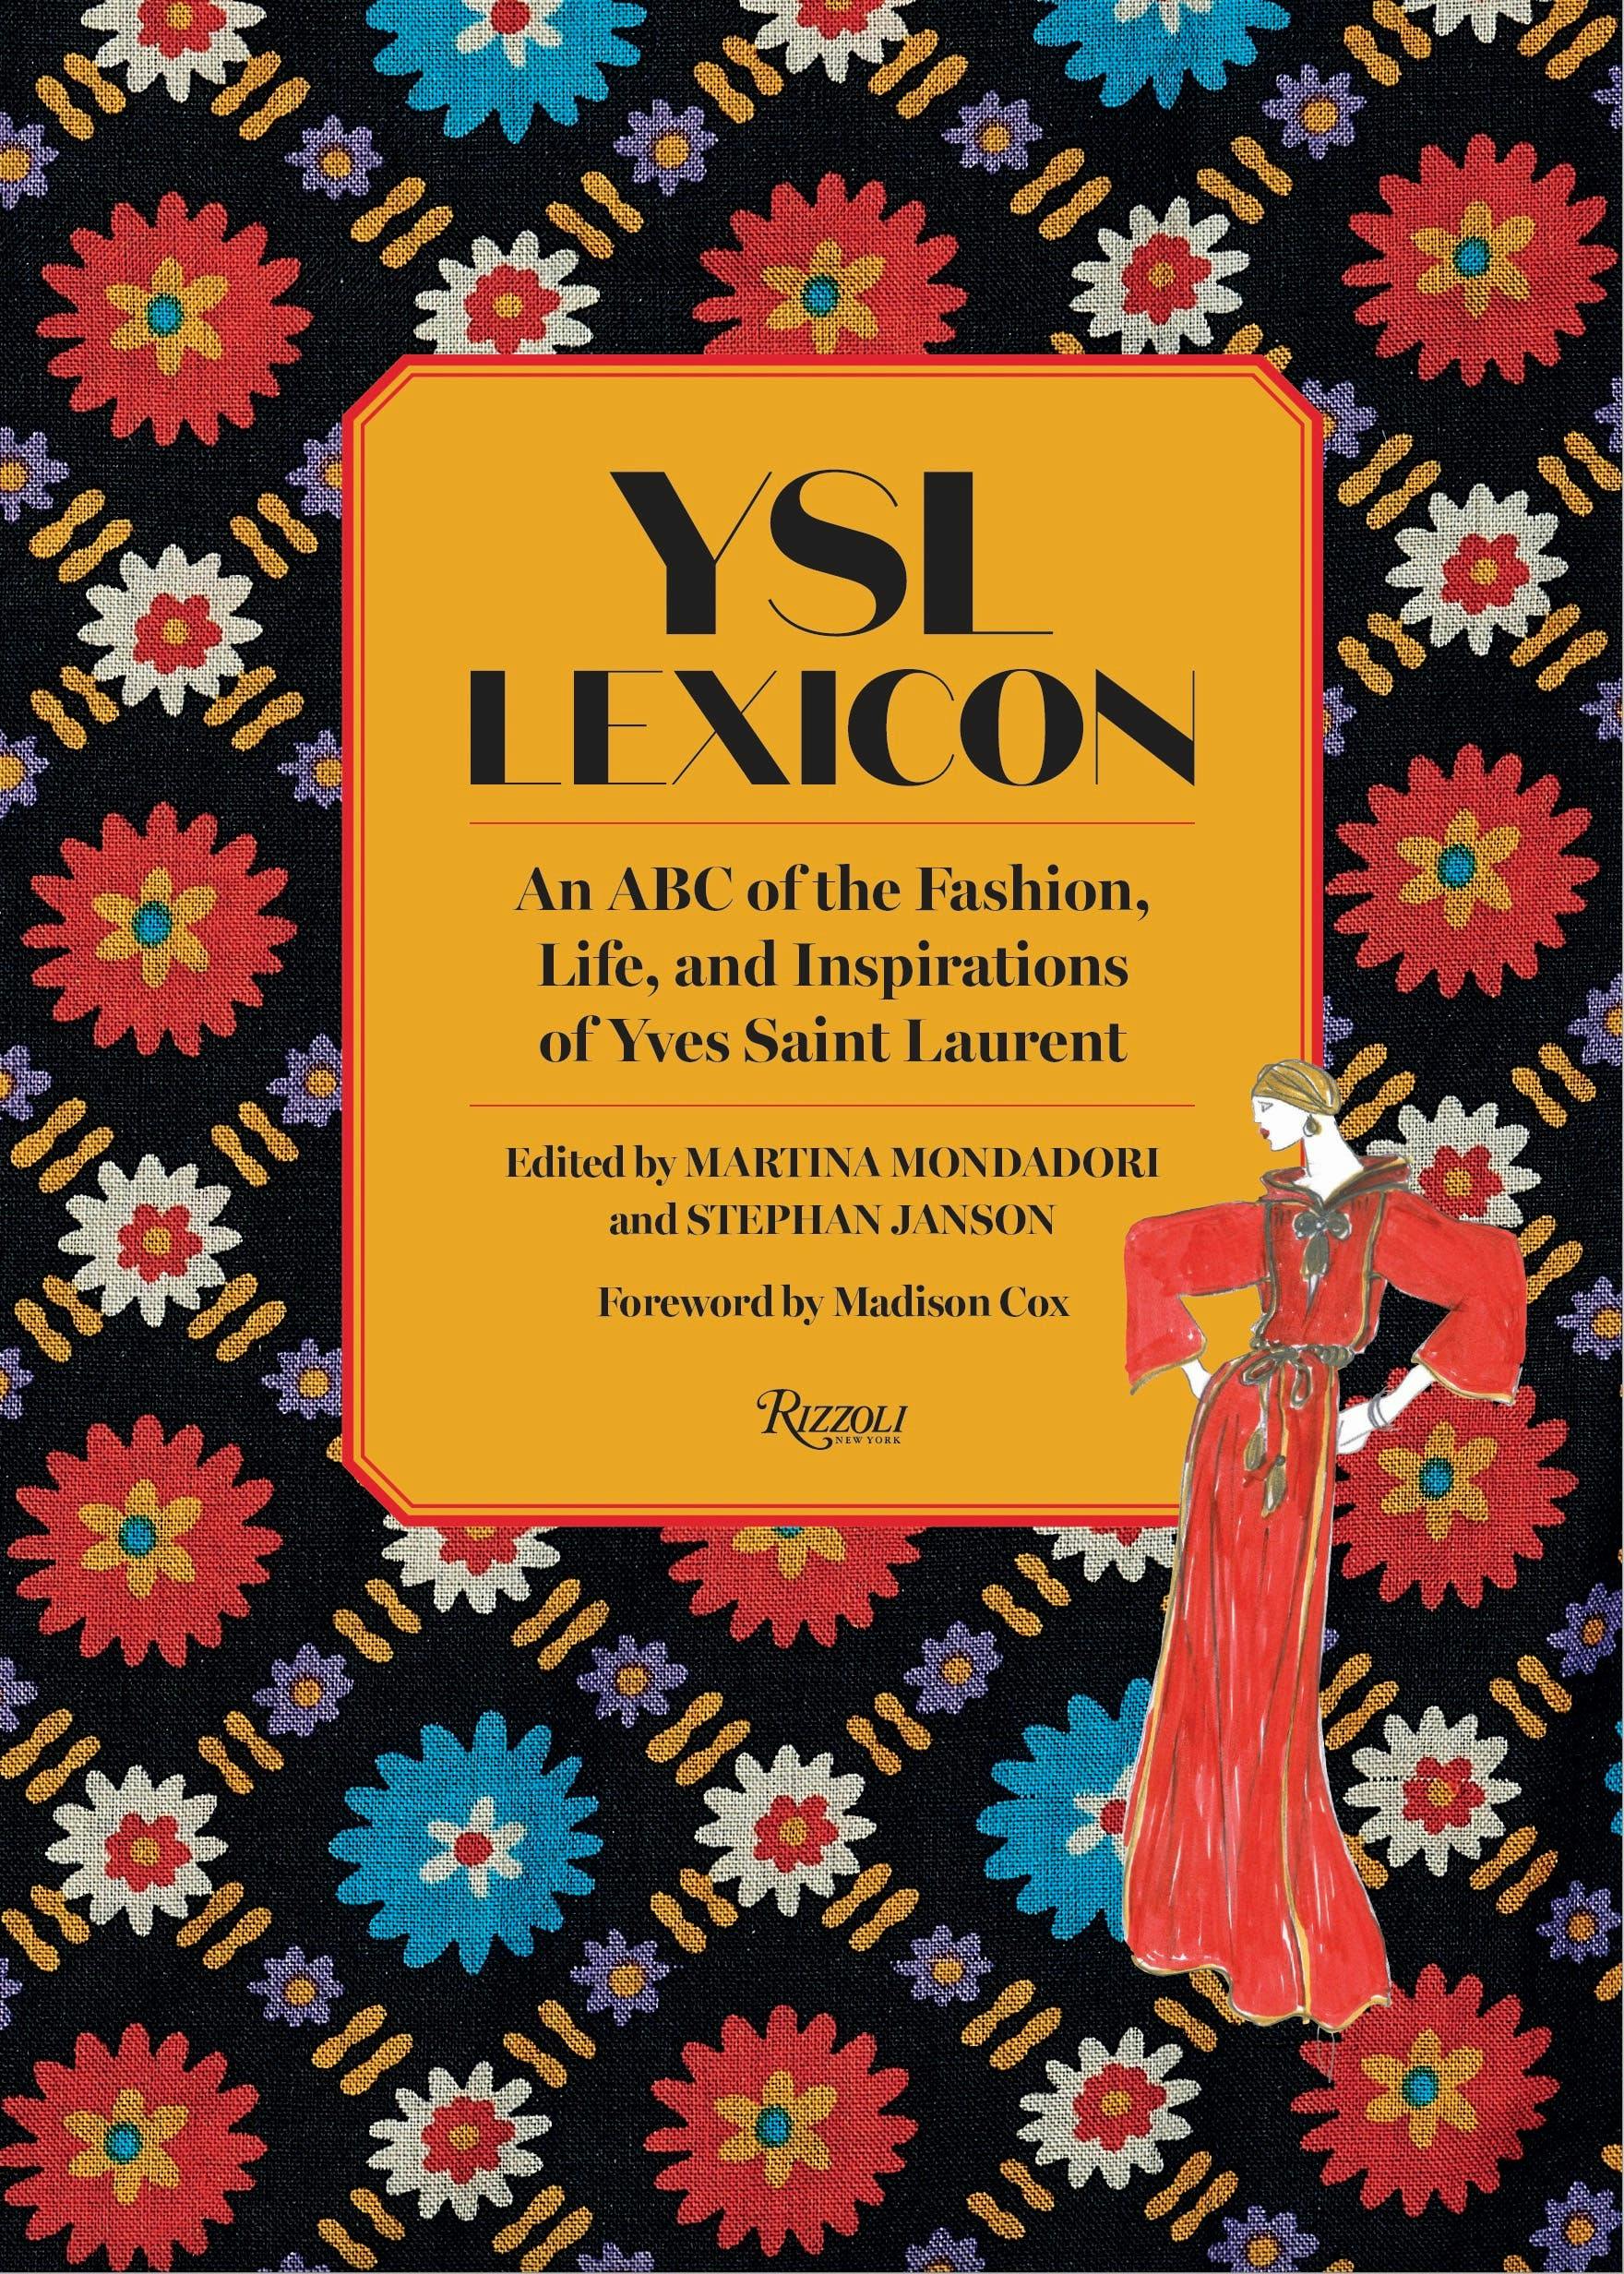 YSL LEXICON An ABC of the Fashion, Life, and Inspiration of Yves Saint Laurent ©2020 Cabana Magazine